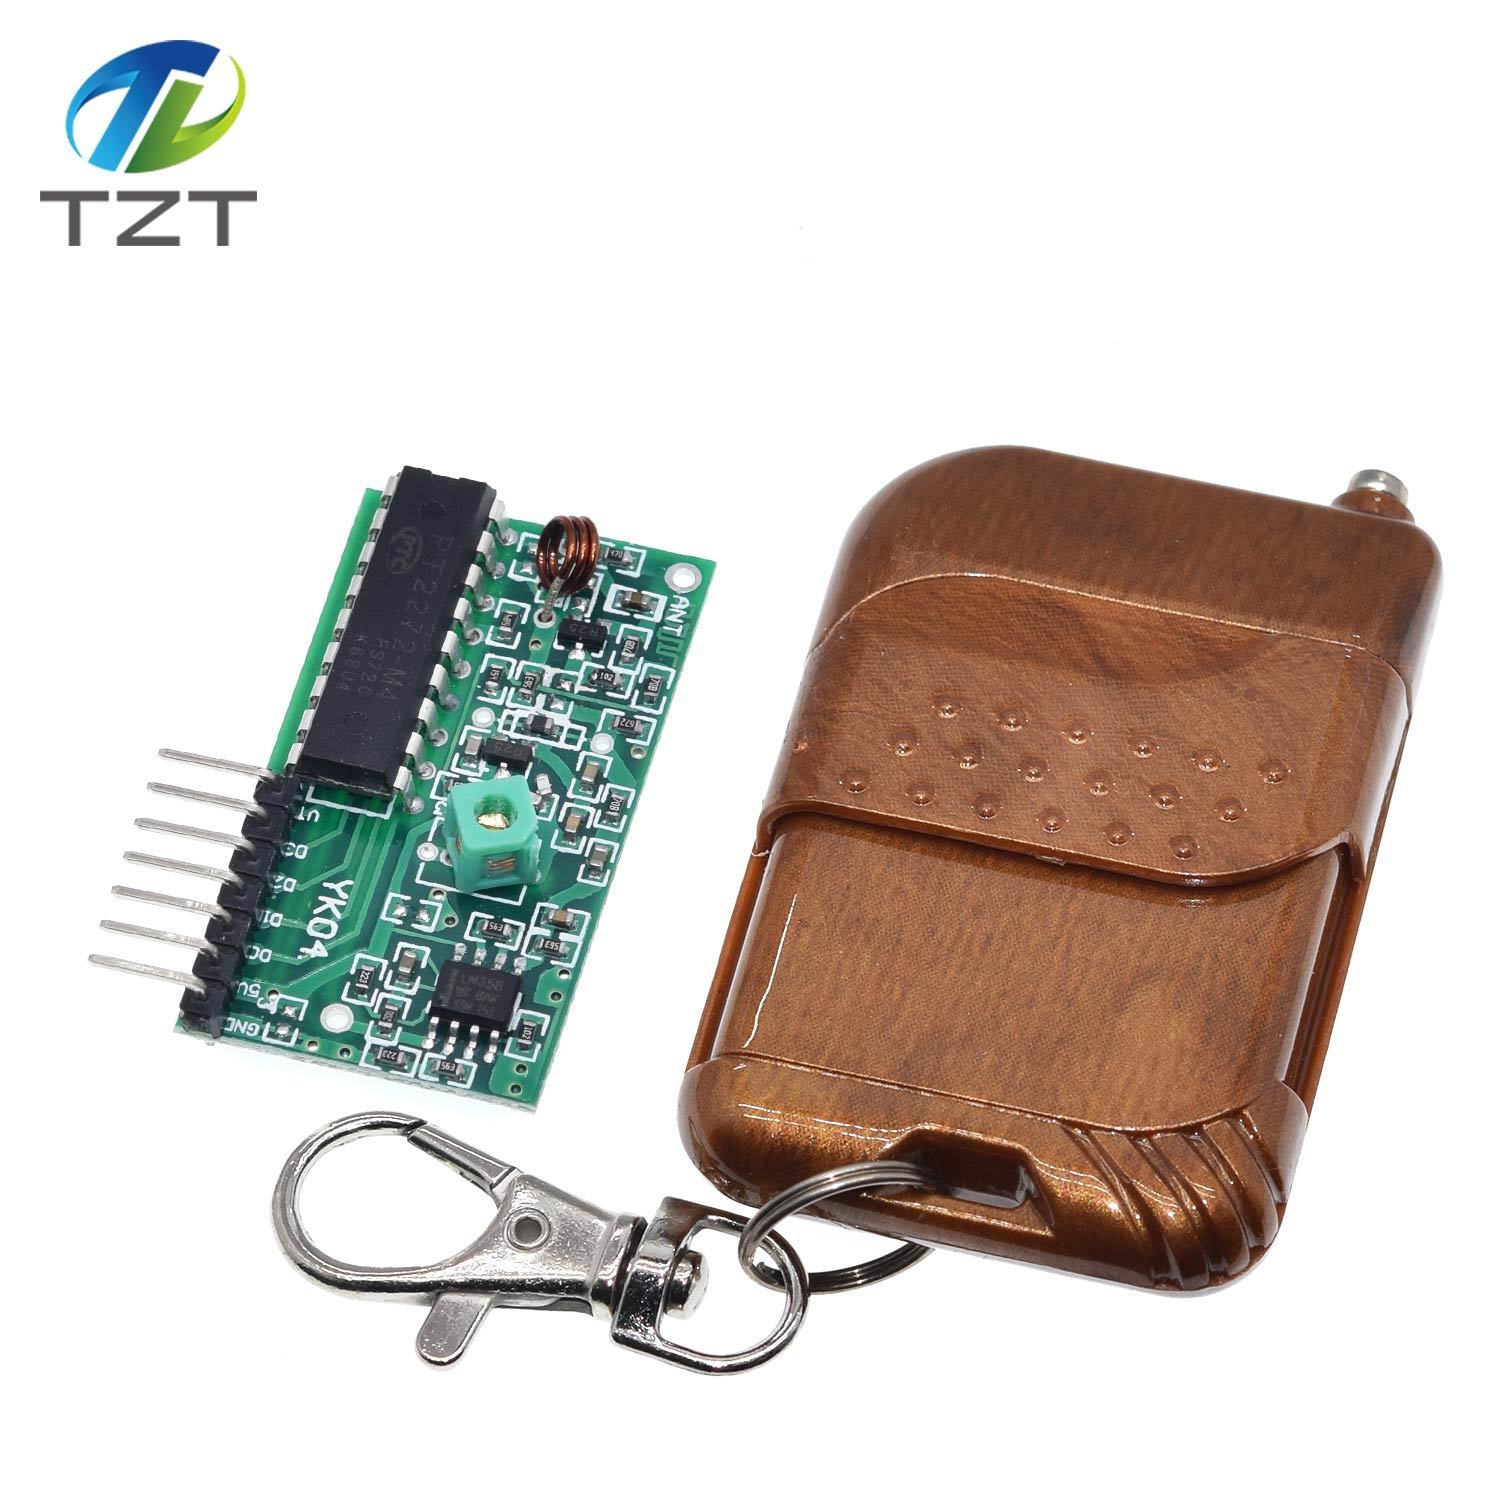 TZT 2262/2272 4 Channel 315Mhz Key Wireless Remote Control Kits Receiver module For arduino